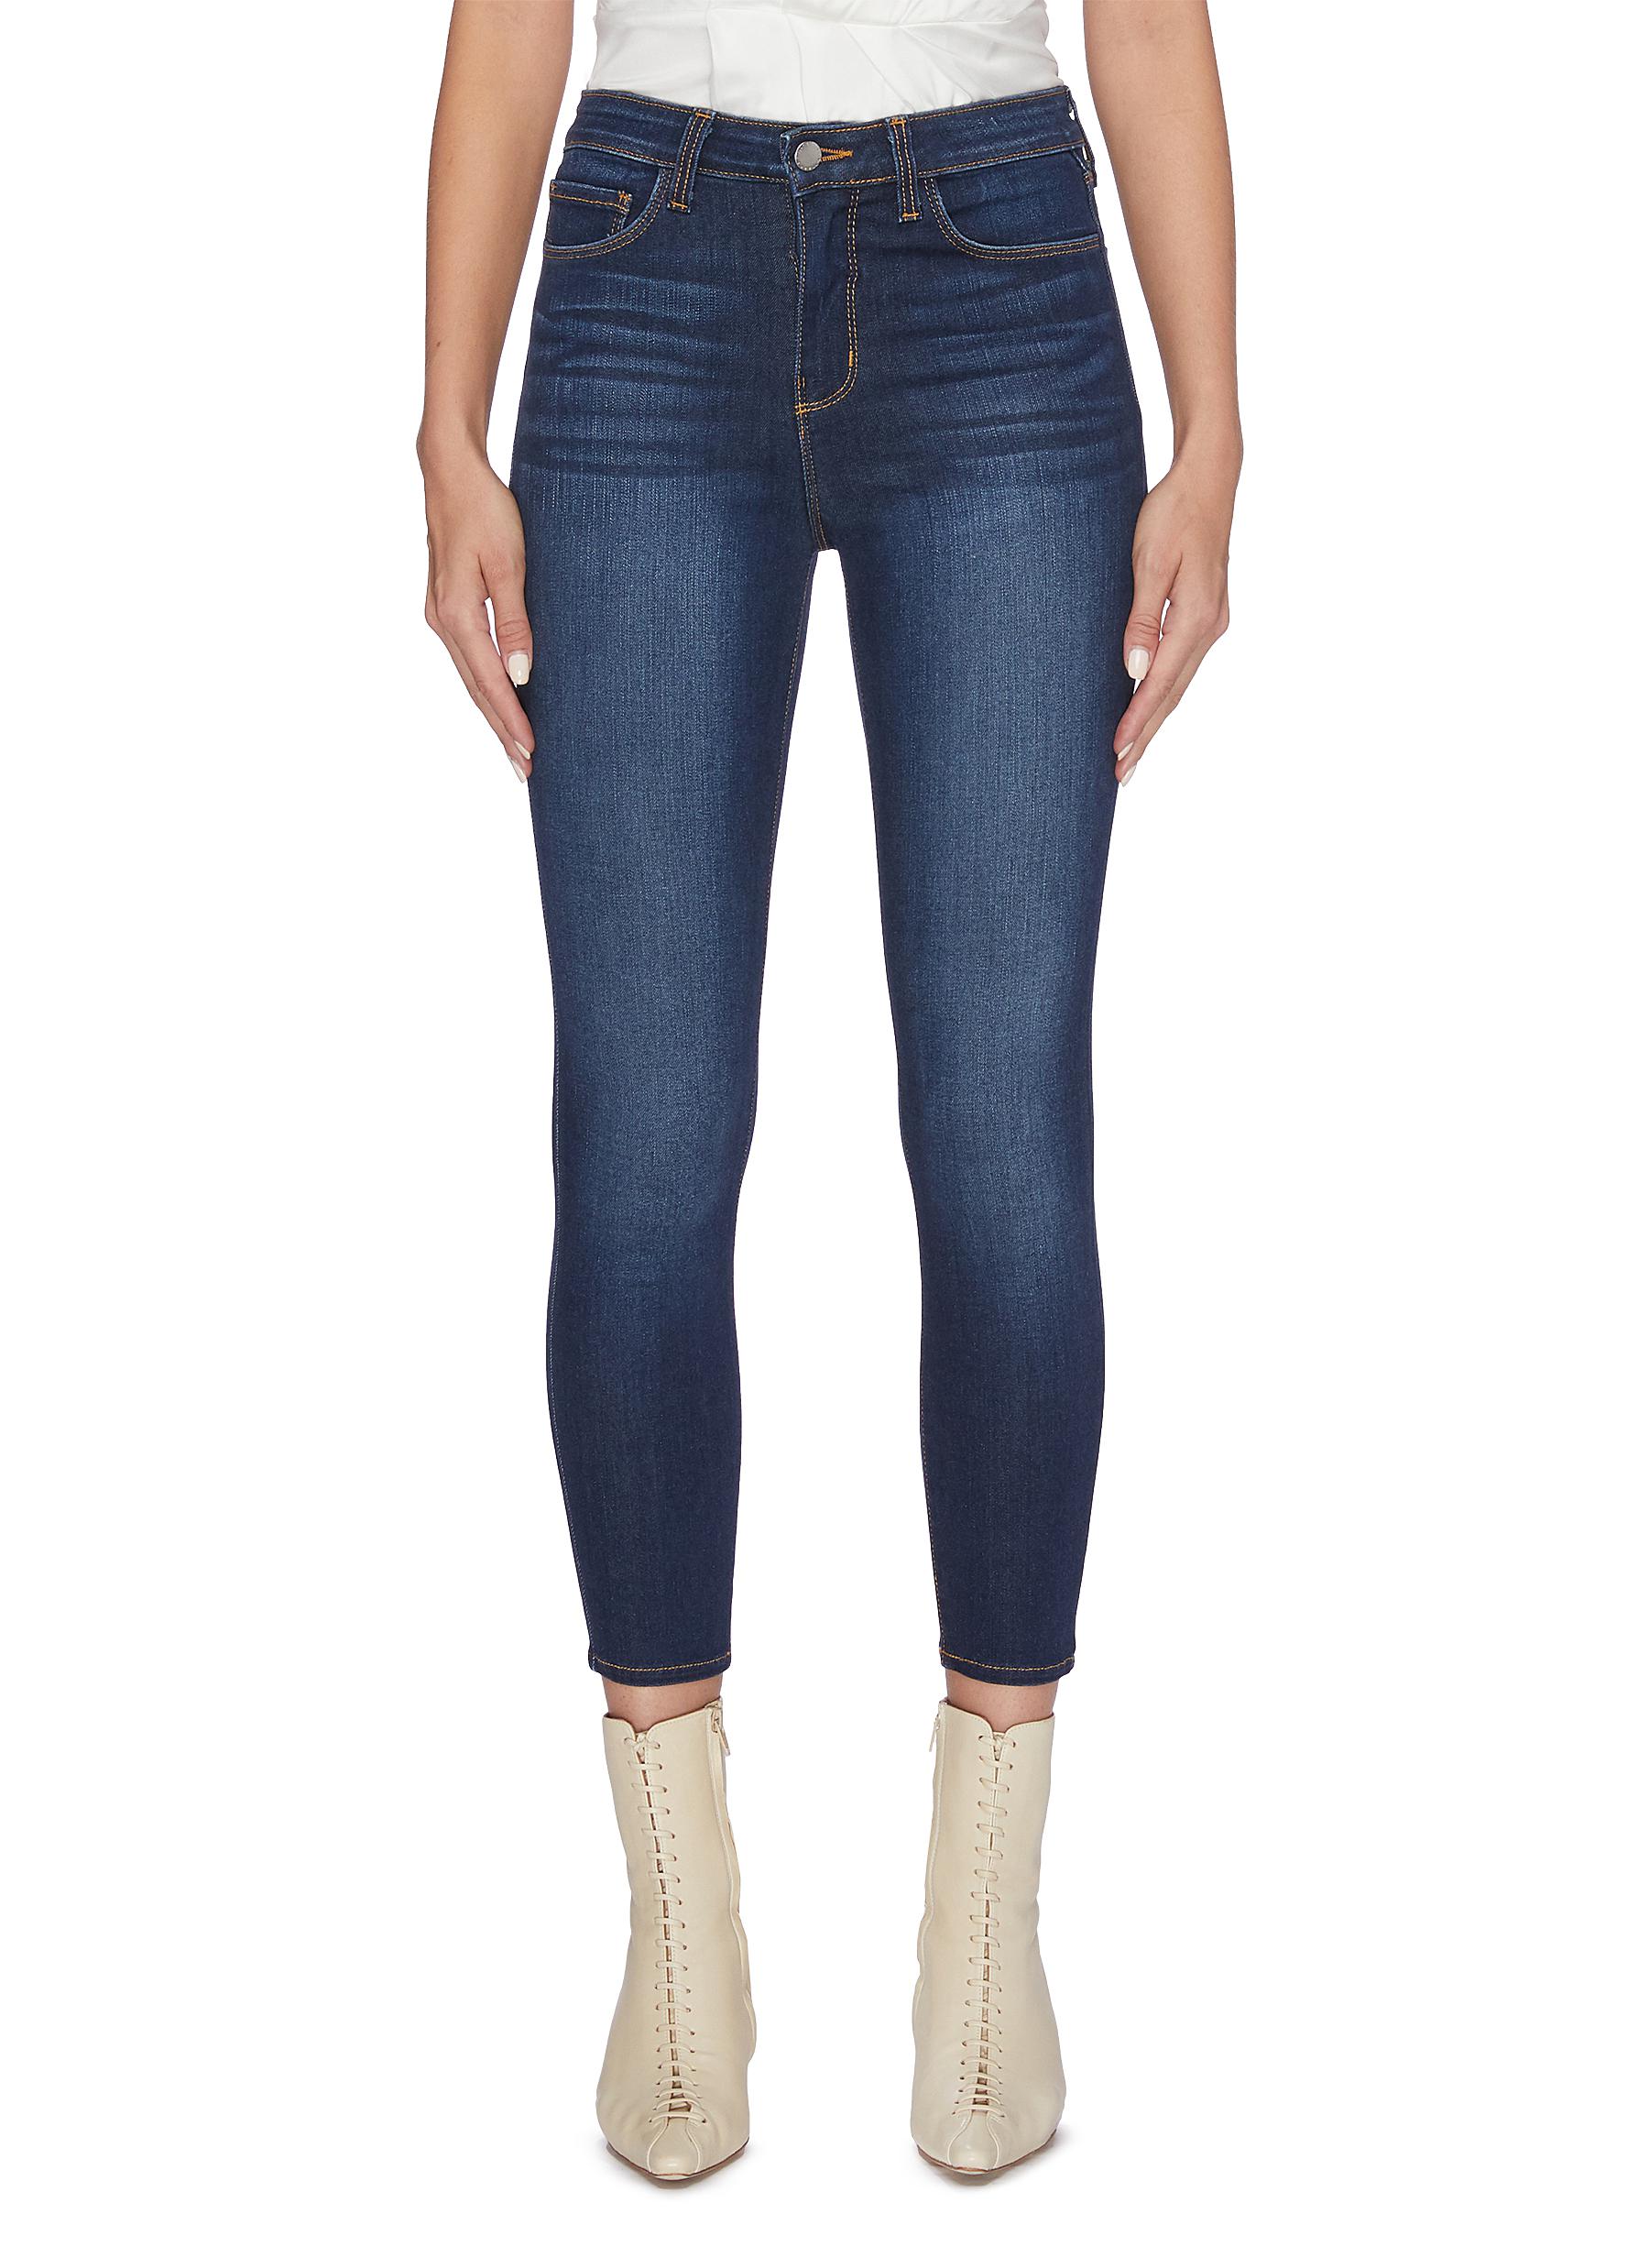 L'AGENCE 'Margot' cropped skinny jeans